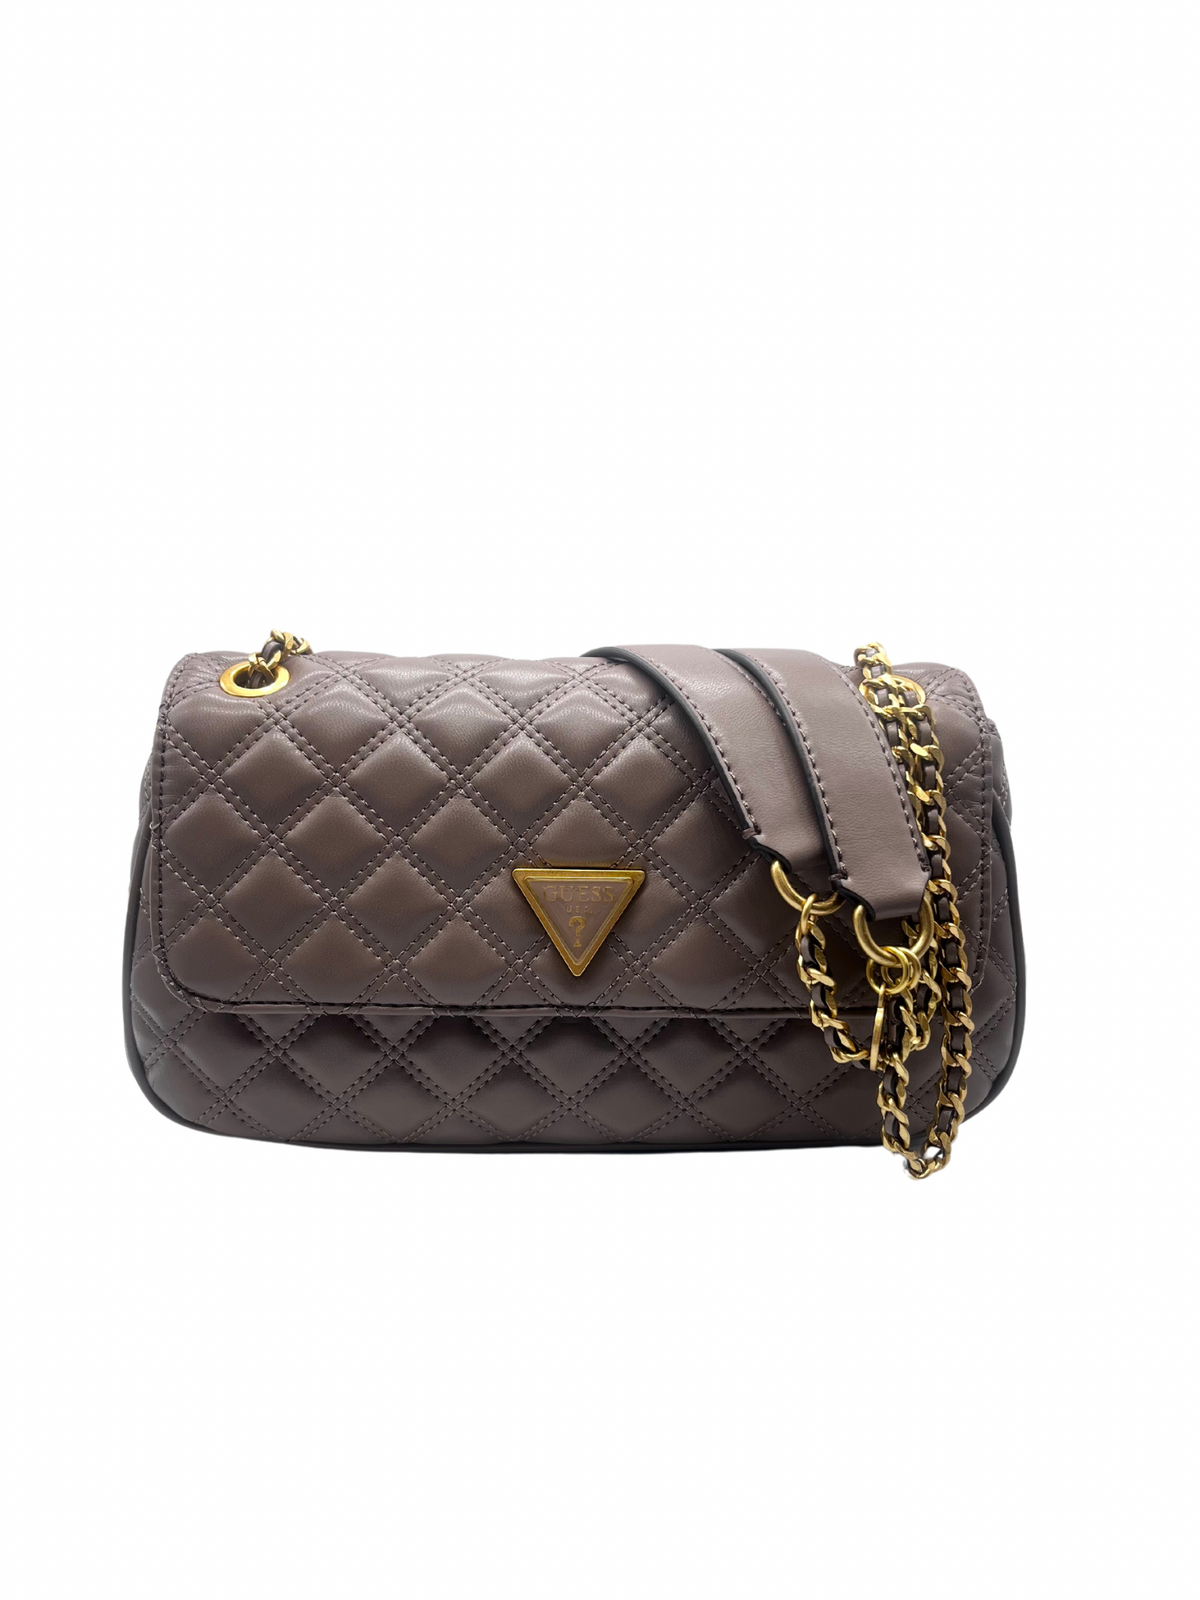 Guess Dark Taupe Quilted Crossbody Bag